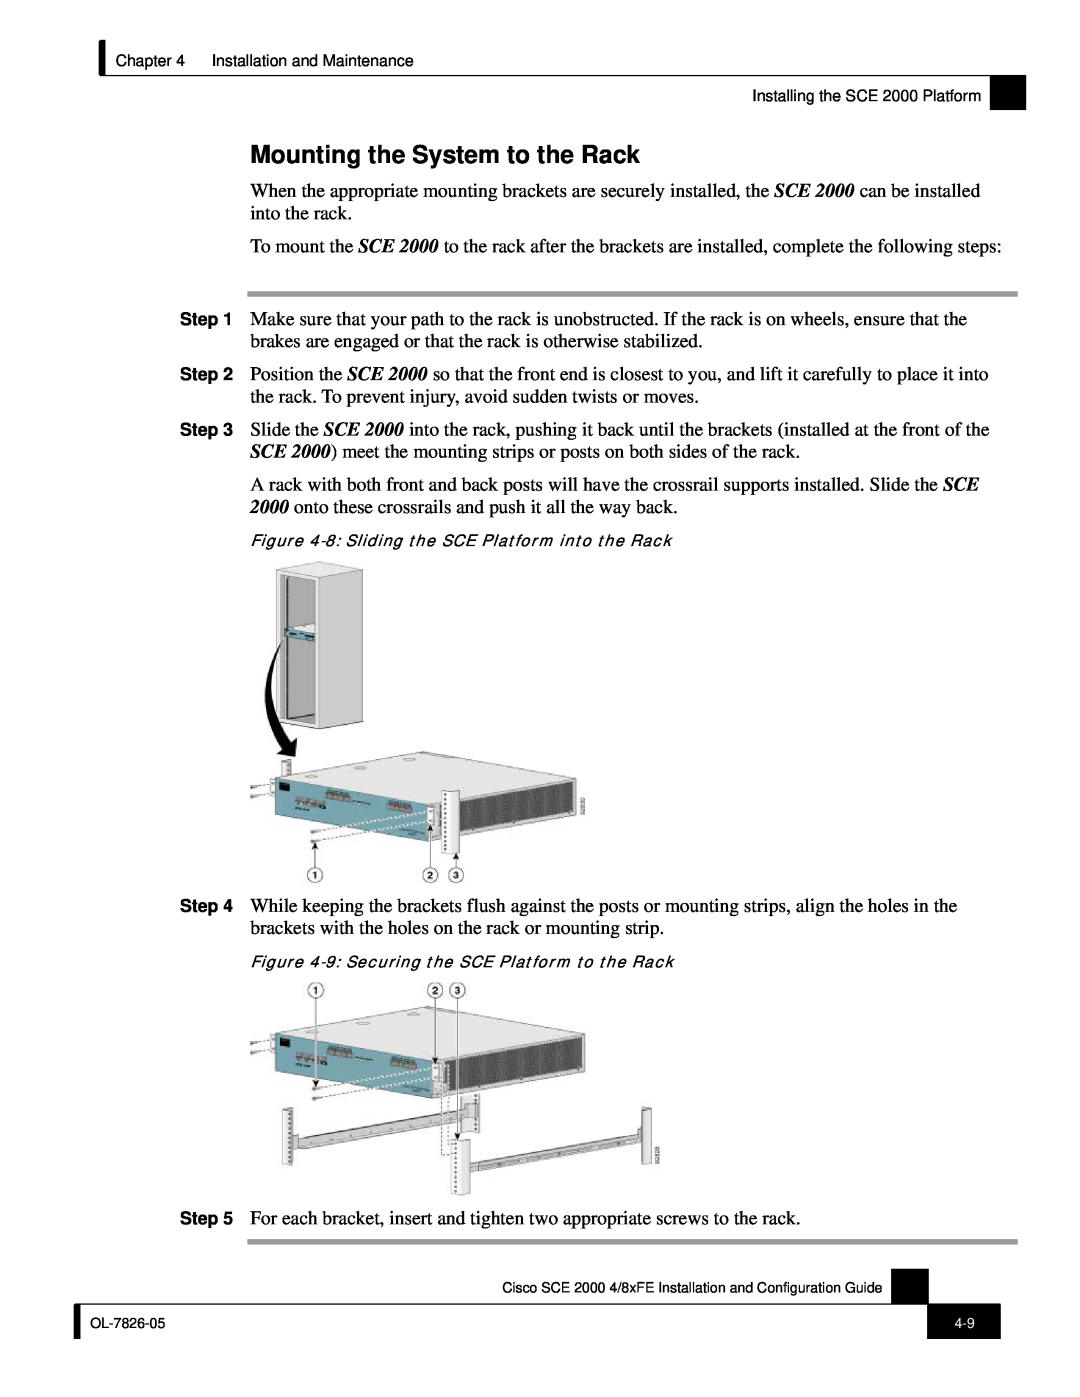 Cisco Systems SCE 2000 4/8xFE manual Mounting the System to the Rack, 8 Sliding the SCE Platform into the Rack 